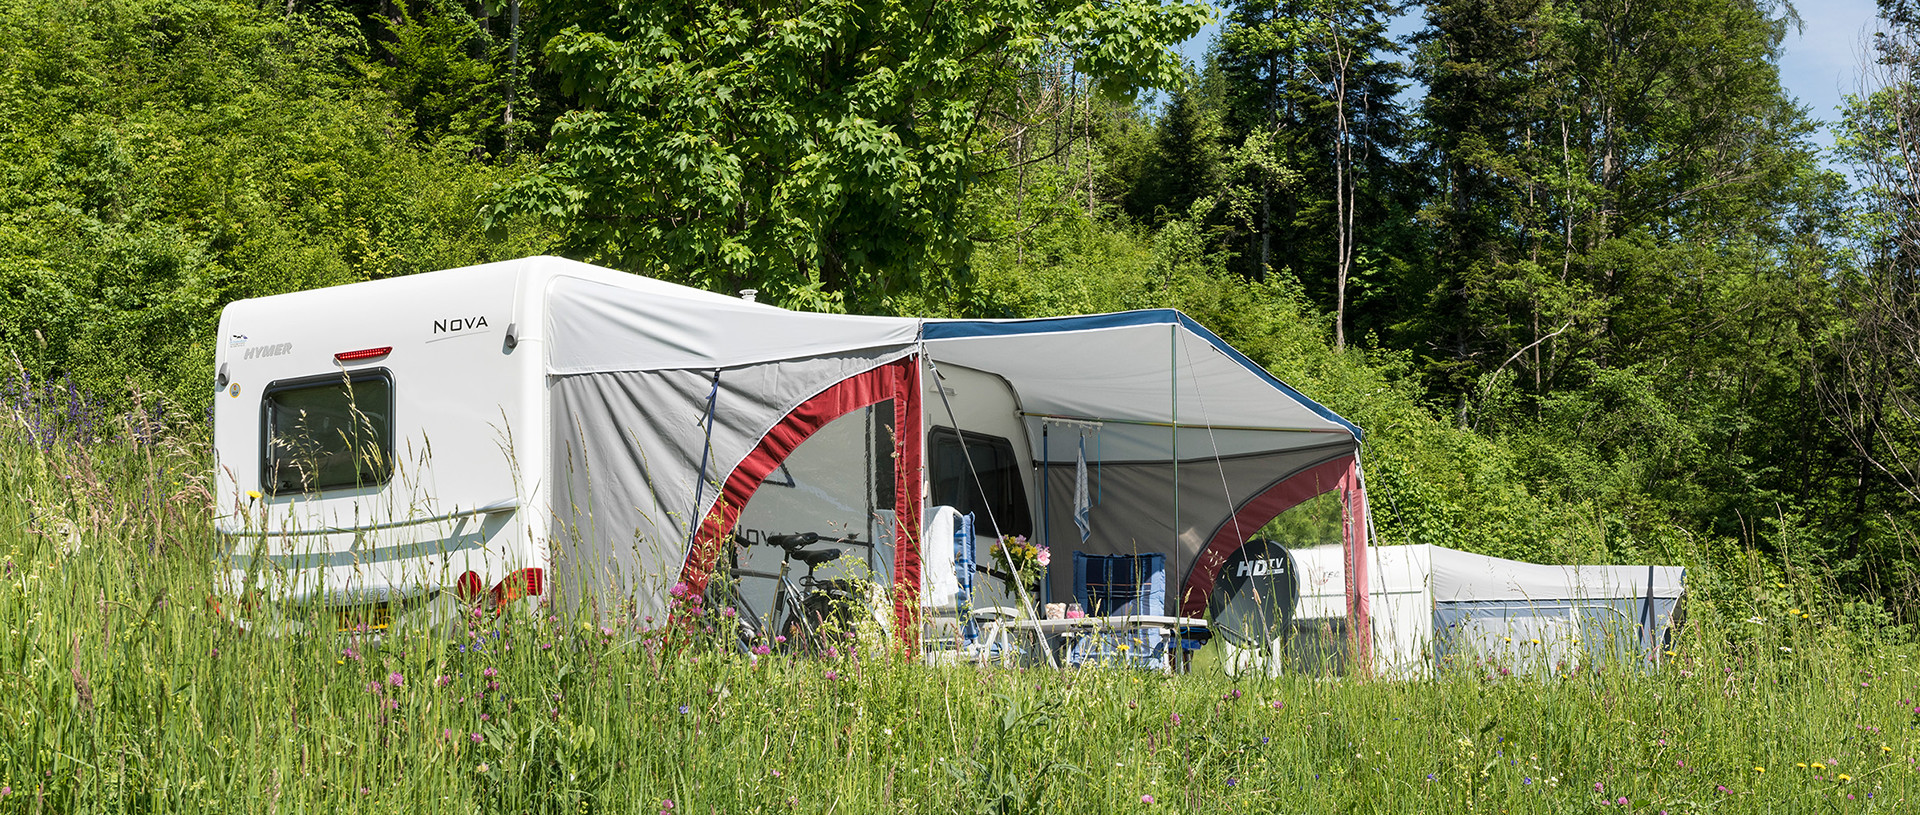 Camping and spa. Enjoy both at the only Leading Camping site